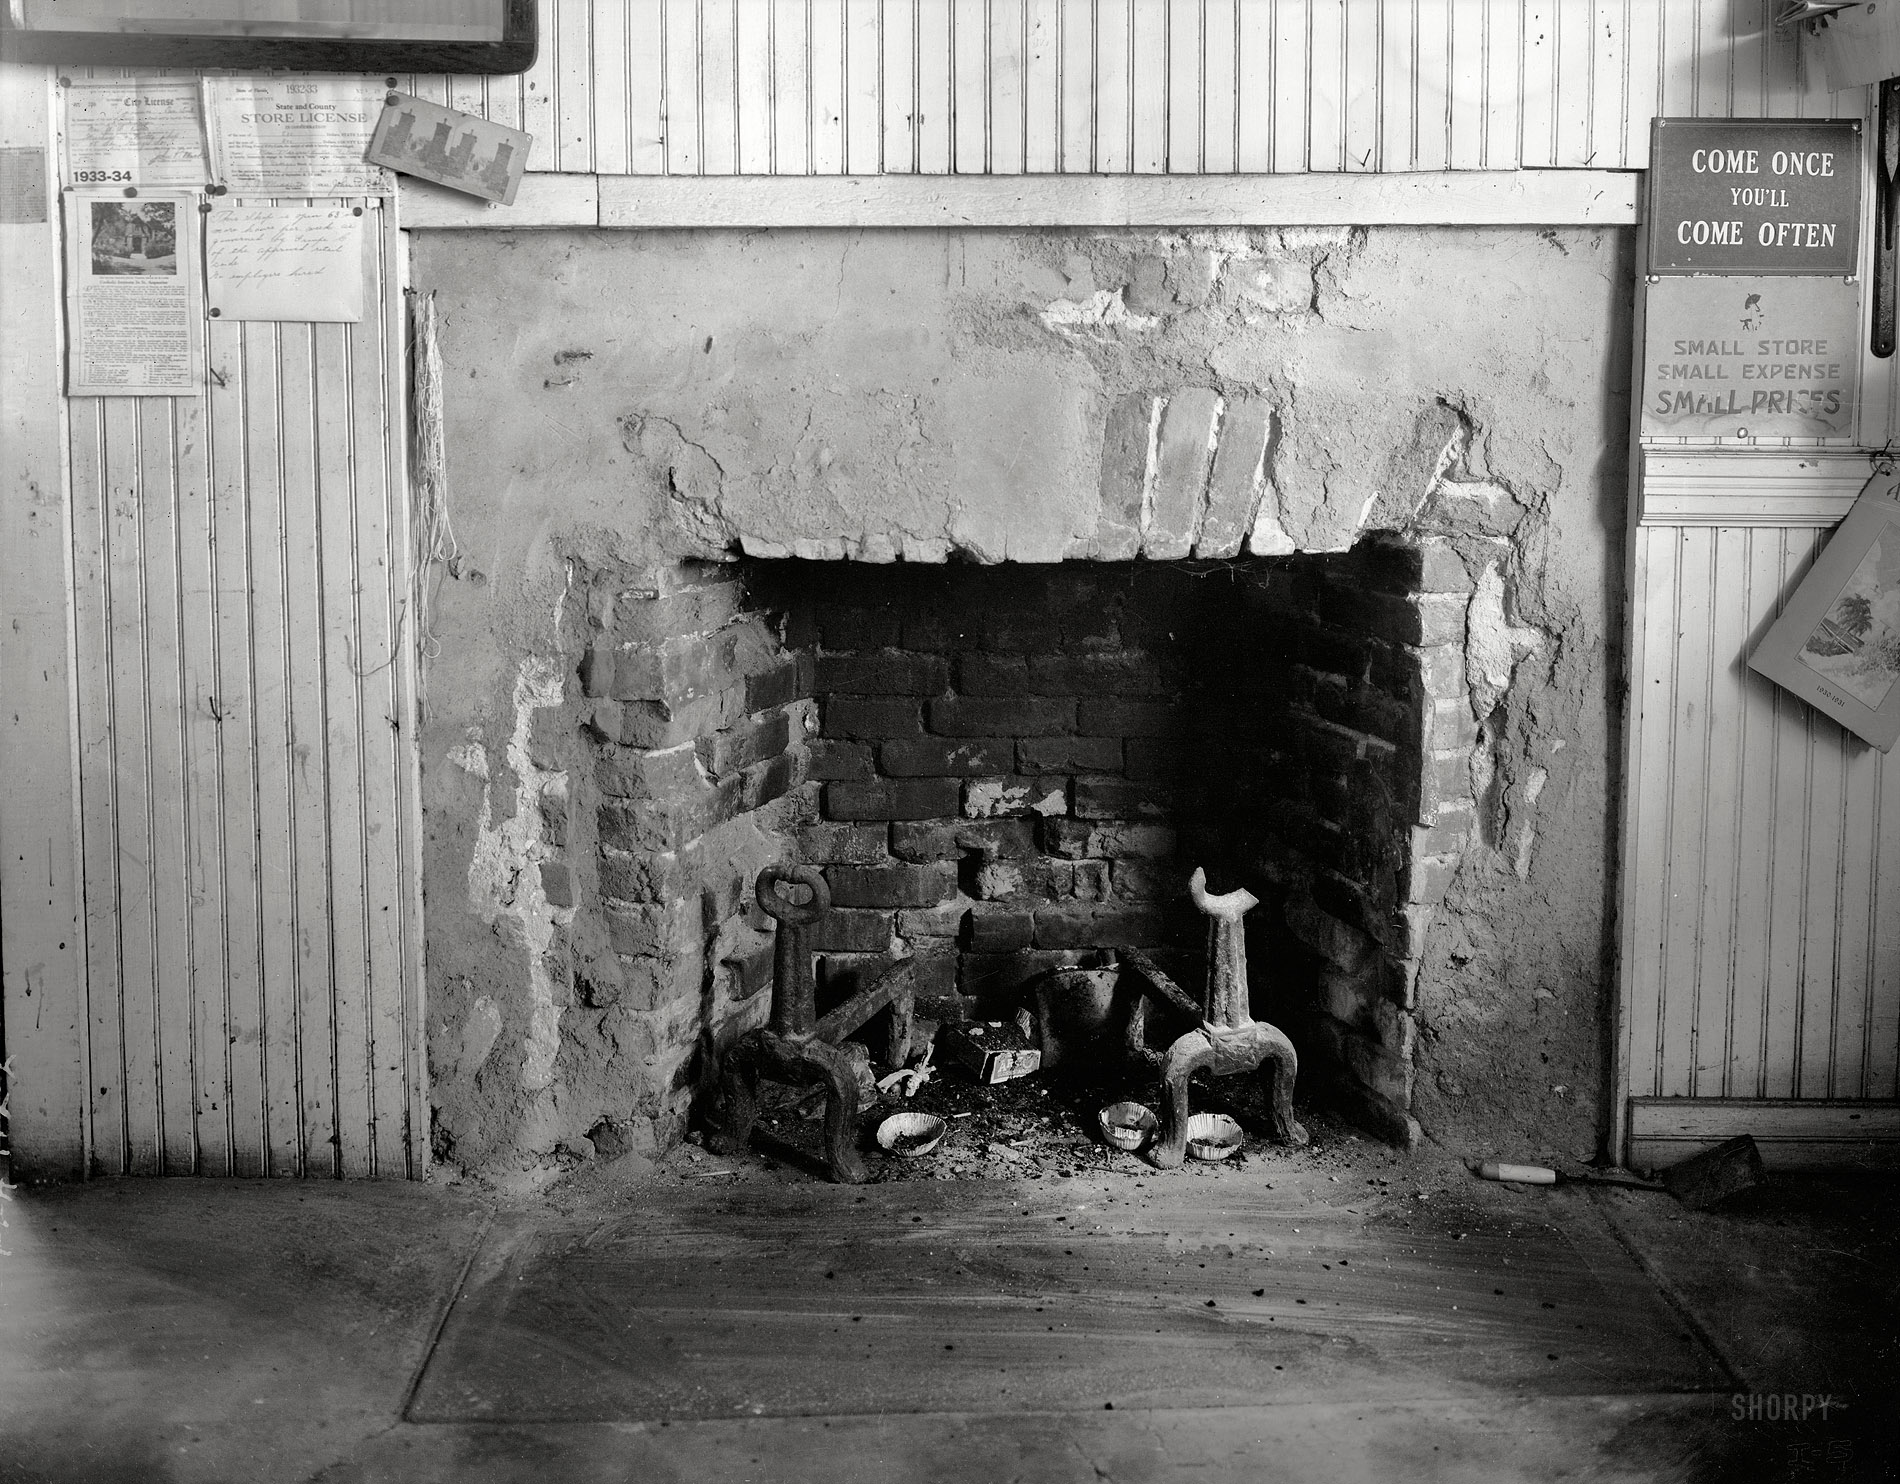 Florida circa 1937. "Old Spanish Inn, 43 George Street, St. Augustine. Dr. Chatelain's photographs. P.A. Wolfe, photographer." Fireplace in the "Grass Novelty Shop" of the Old Spanish Inn, also known as the De Mesa-Sanchez House. Acetate negative, Frances Benjamin Johnston collection.  View full size.